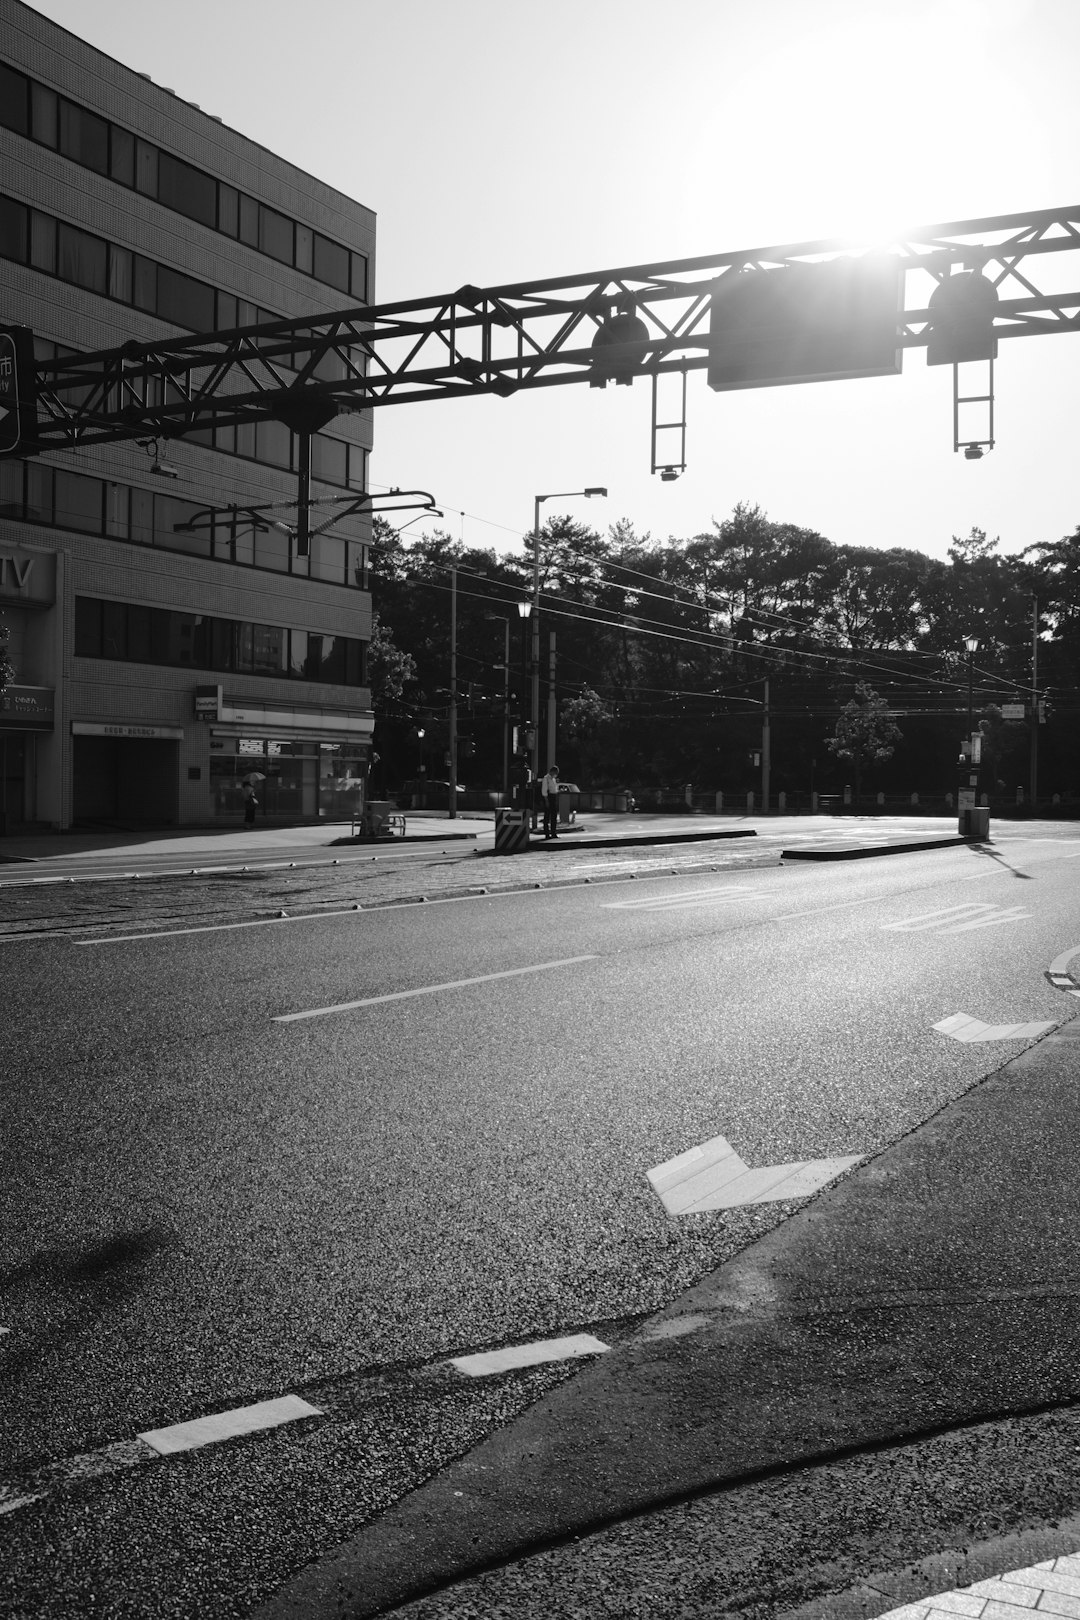 grayscale photo of a road with traffic light